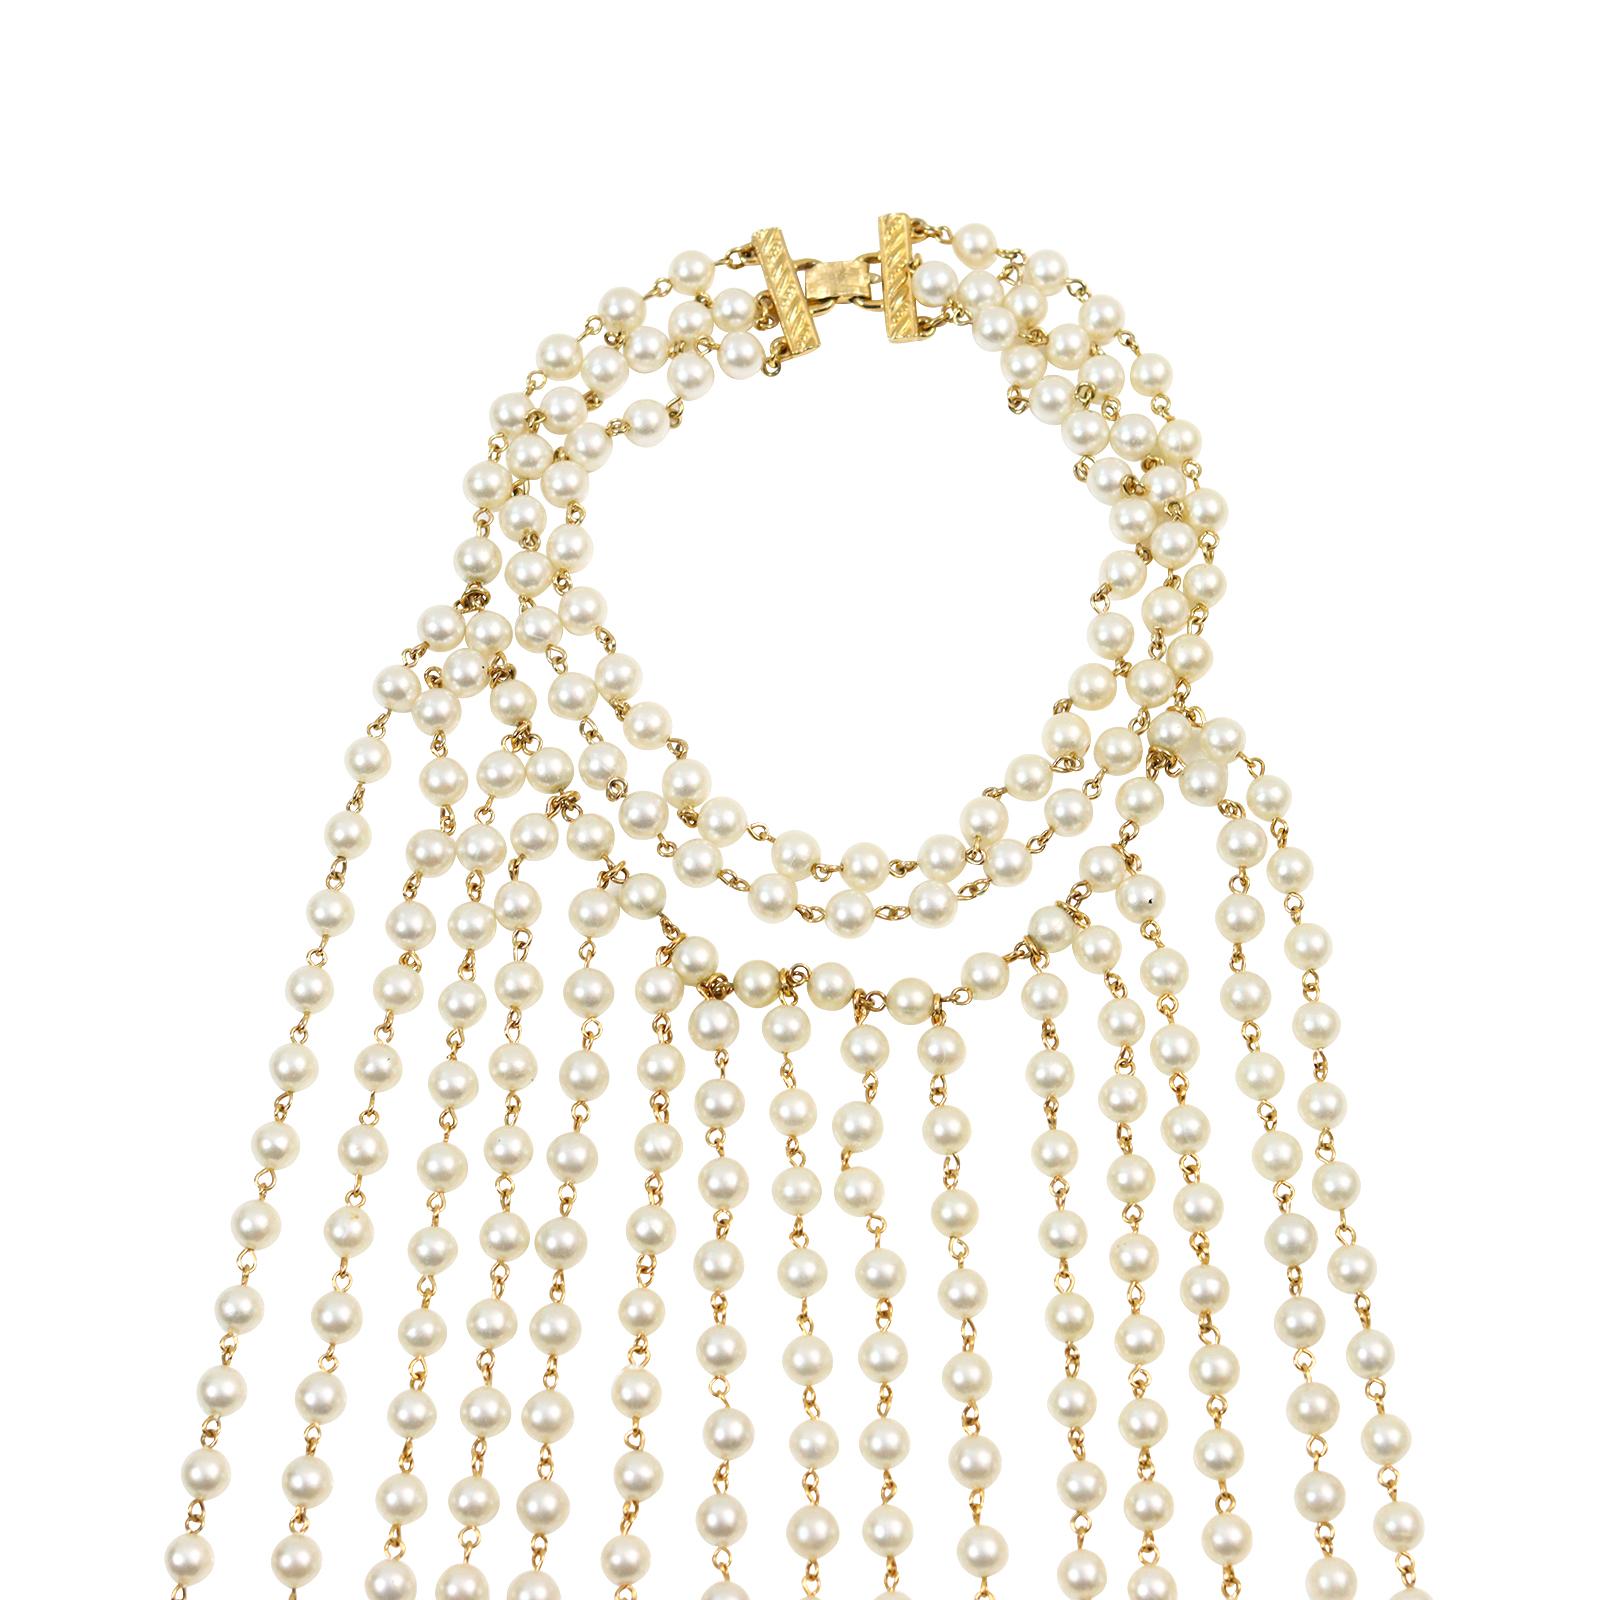 Vintage Faux Pearl Choker with Cascading Long Necklace, circa 1990s For Sale 6